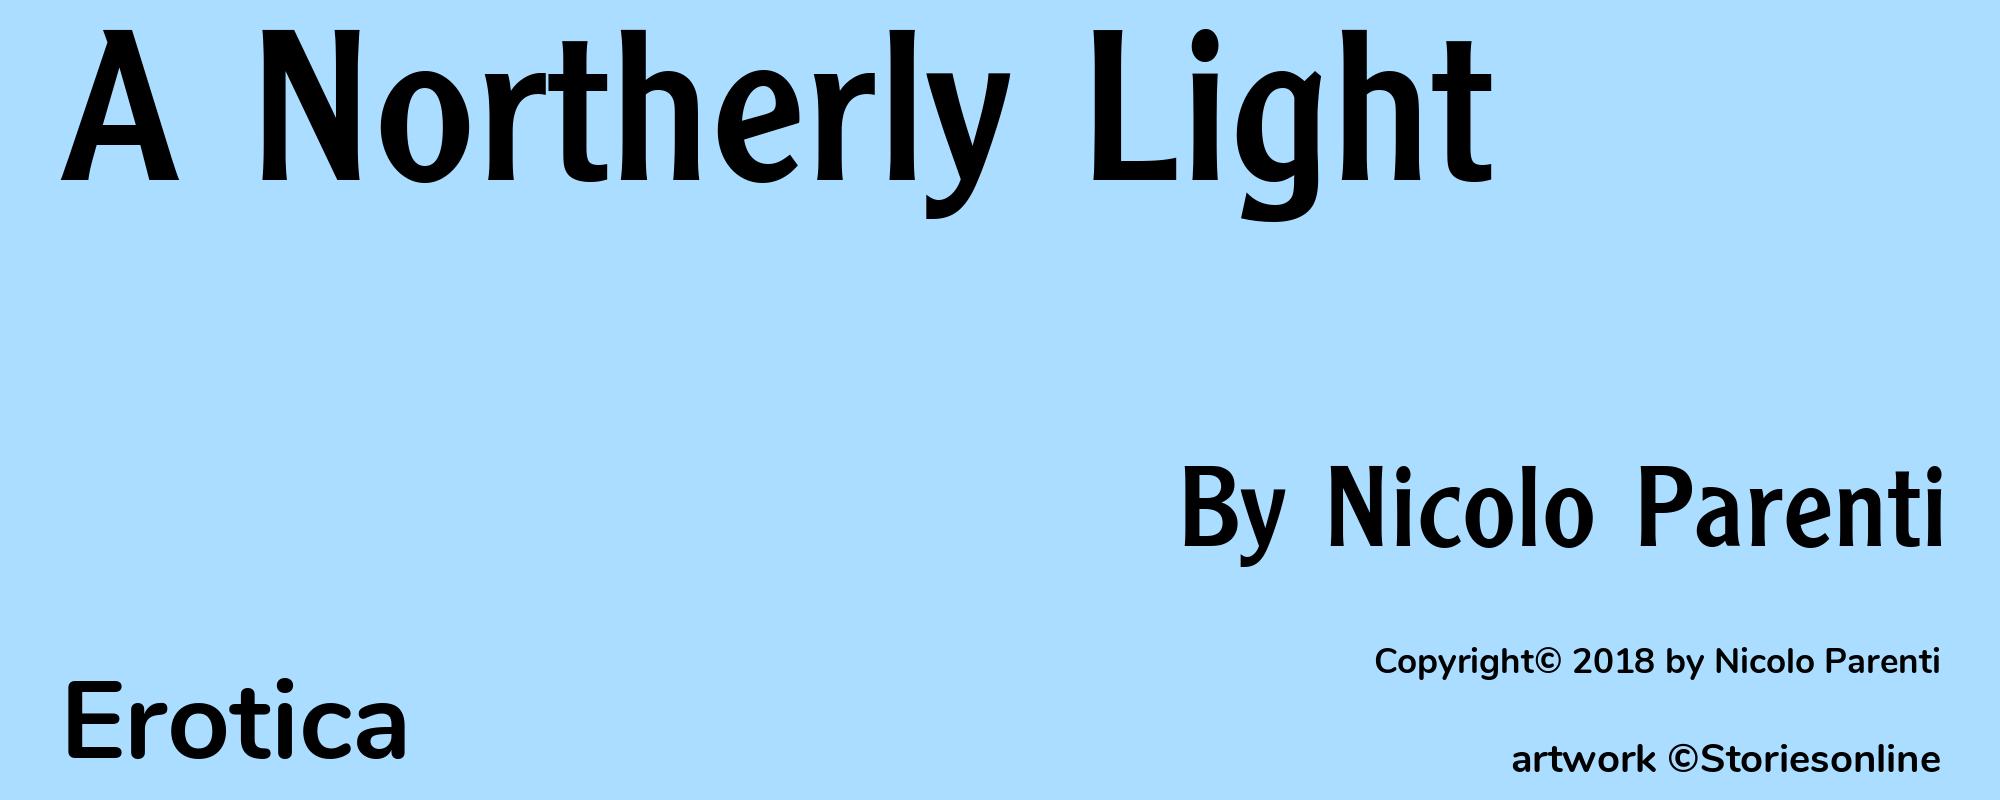 A Northerly Light - Cover